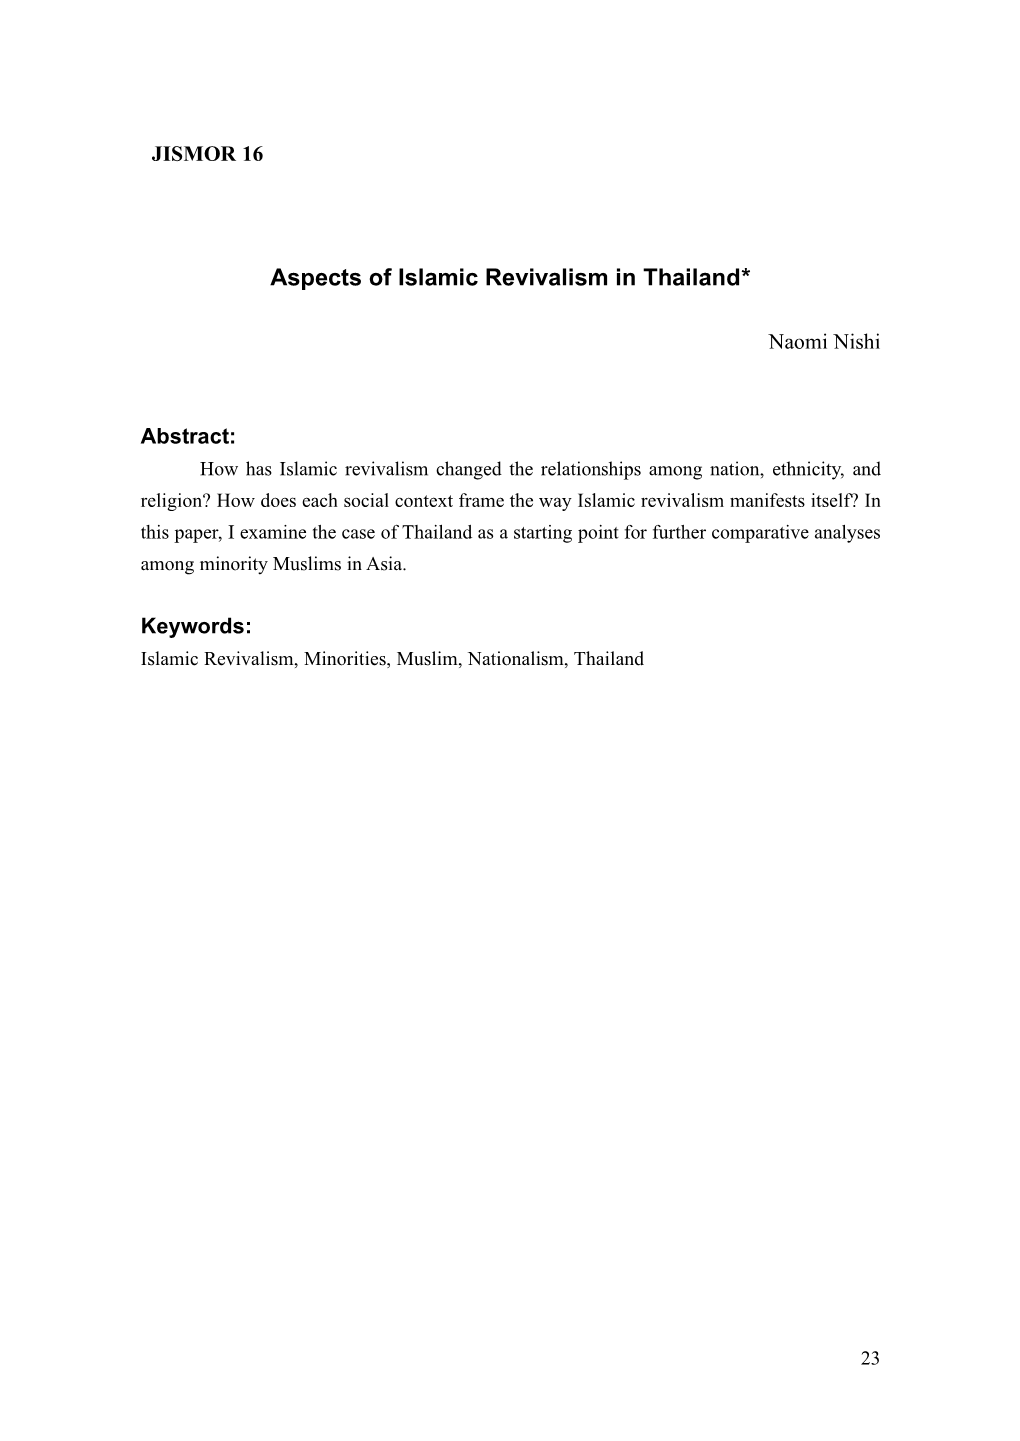 Aspects of Islamic Revivalism in Thailand*